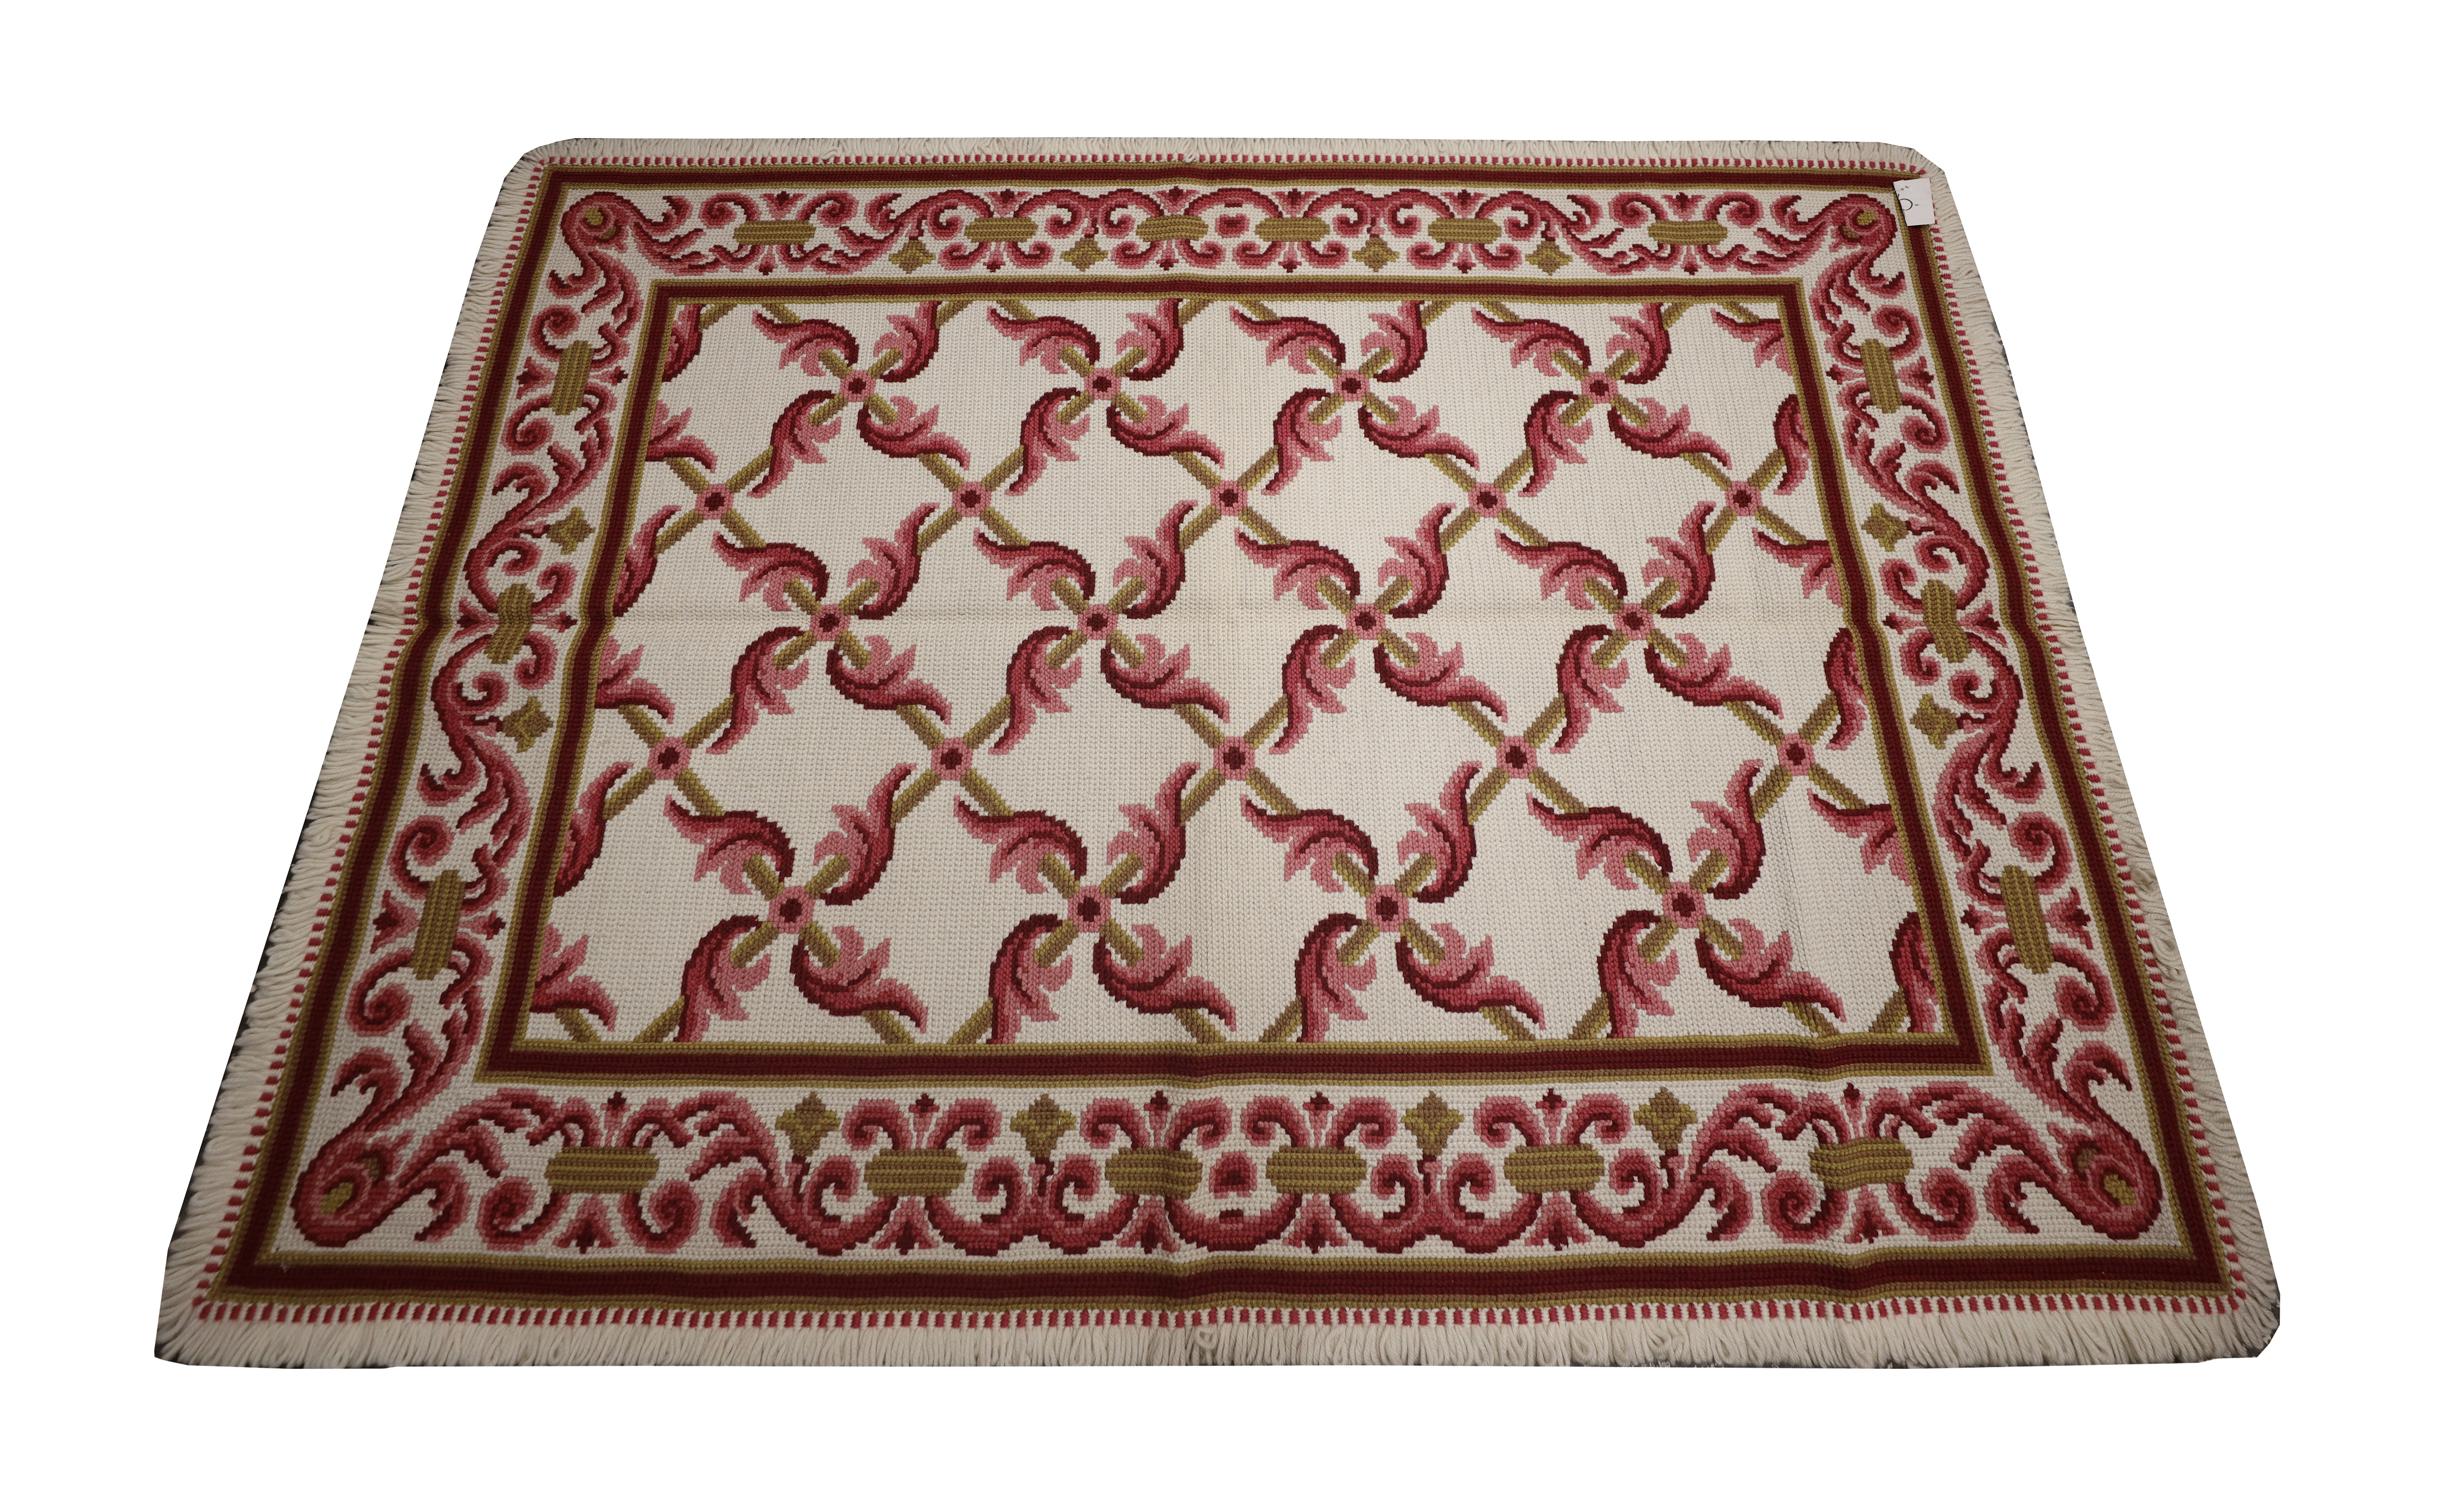 Are you looking for a new carpet to enhance your living room or bedroom? This Beautiful rug could make the perfect accessory. This elegant wool needlepoint is a classic example of a modern Portuguese style rug woven by hand in China in the early